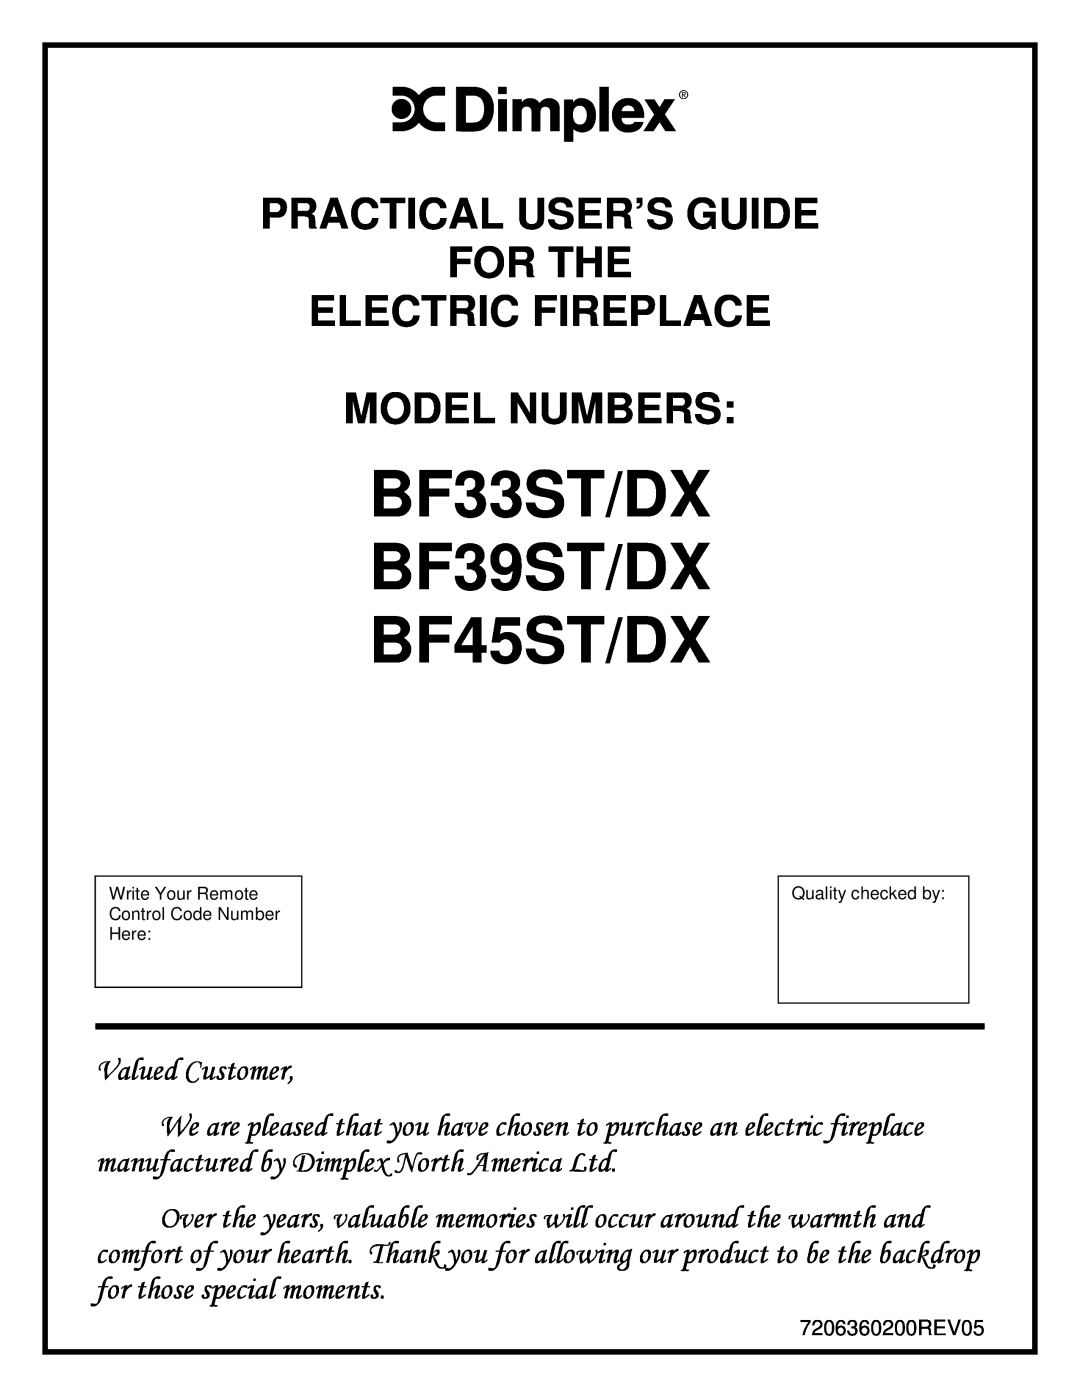 Dimplex DX BF45STDX manual BF33ST/DX BF39ST/DX BF45ST/DX, Practical User’S Guide For The Electric Fireplace, Model Numbers 